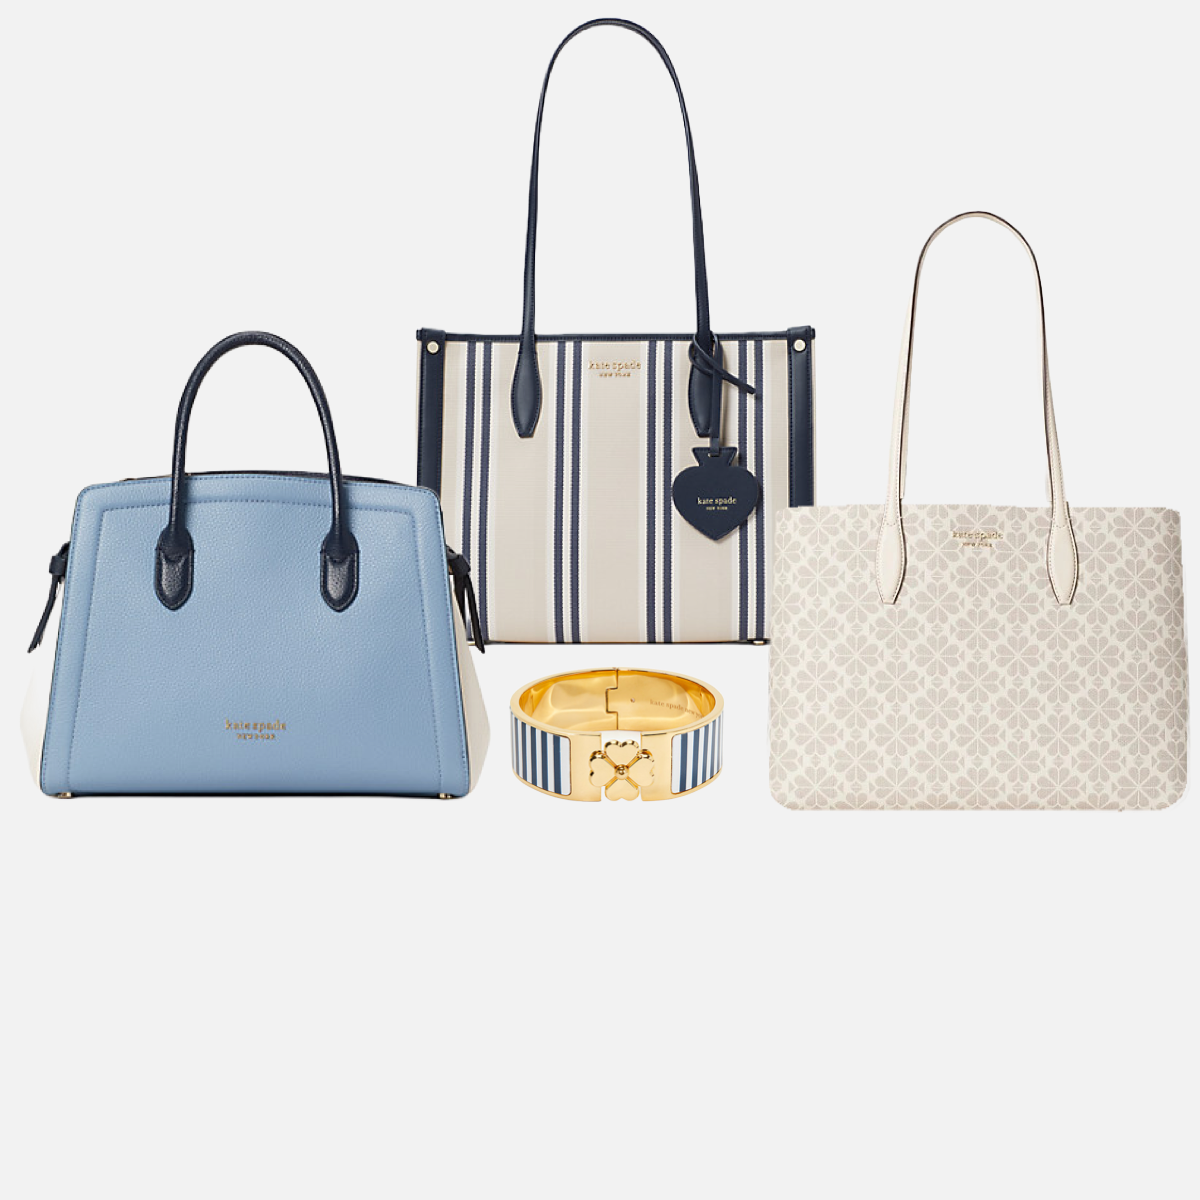 Kate Spade Extra 40% Off Clearance Sale: Deals Starting at $8 - E! Online